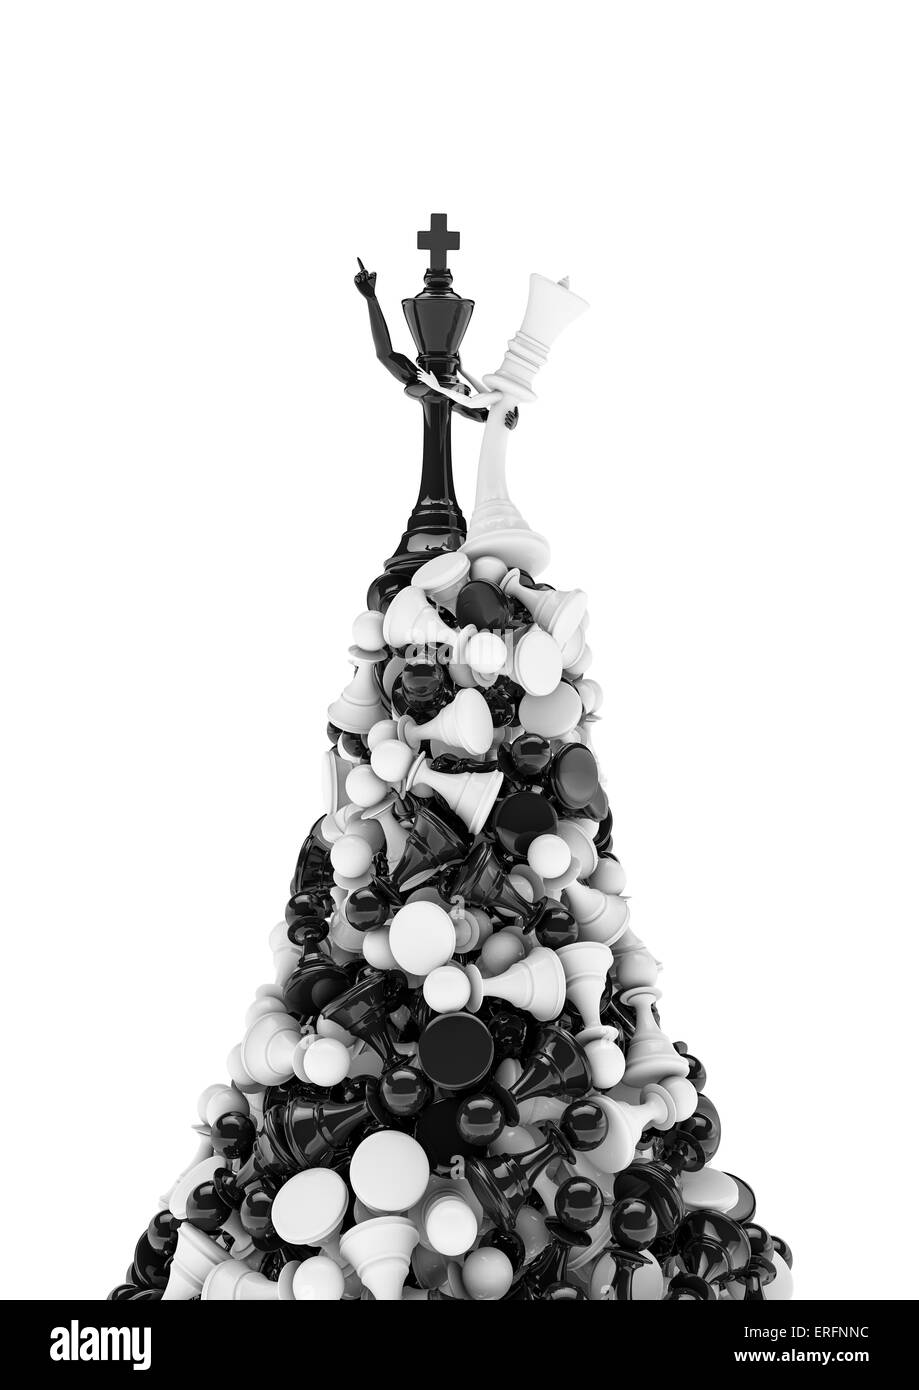 King of the hill, 3D render of black chess king and white queen on mountain of pawns Stock Photo